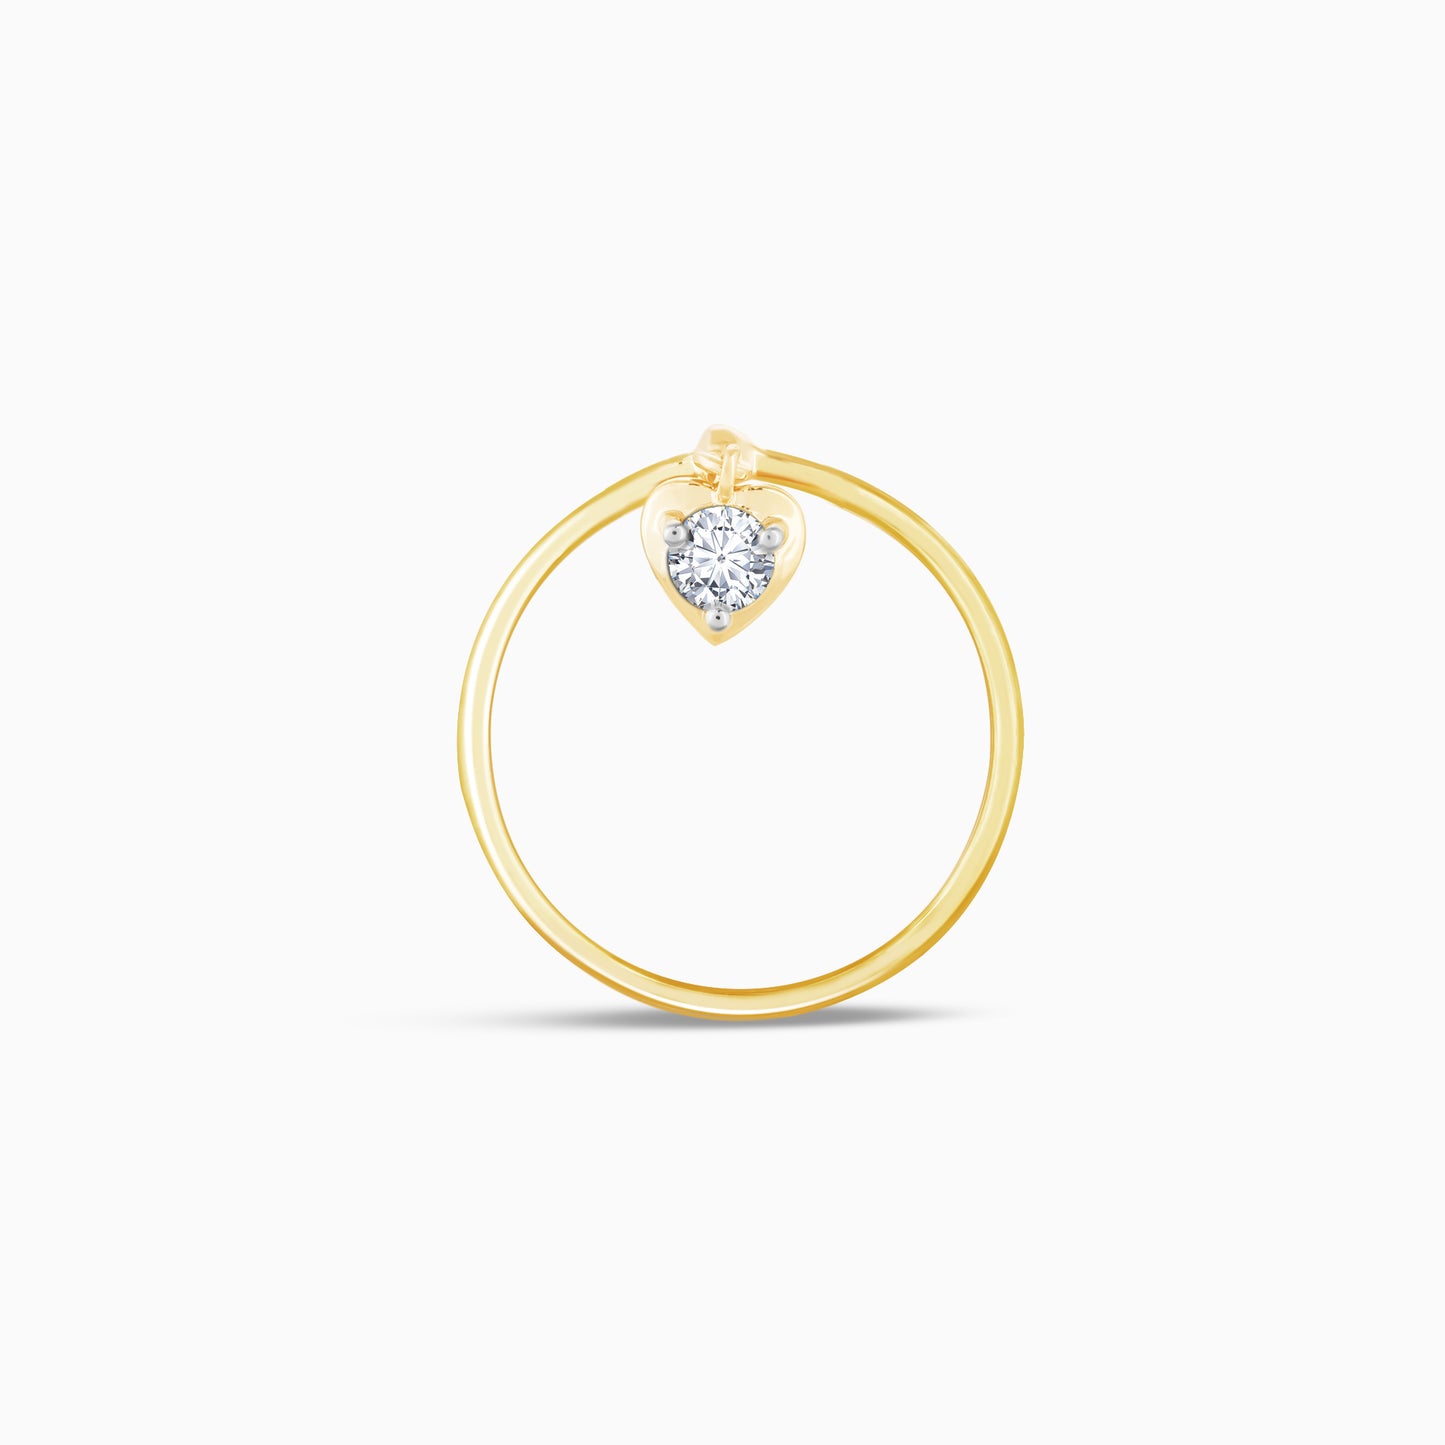 Gold Dangling Solitaire Heart Diamond Ring